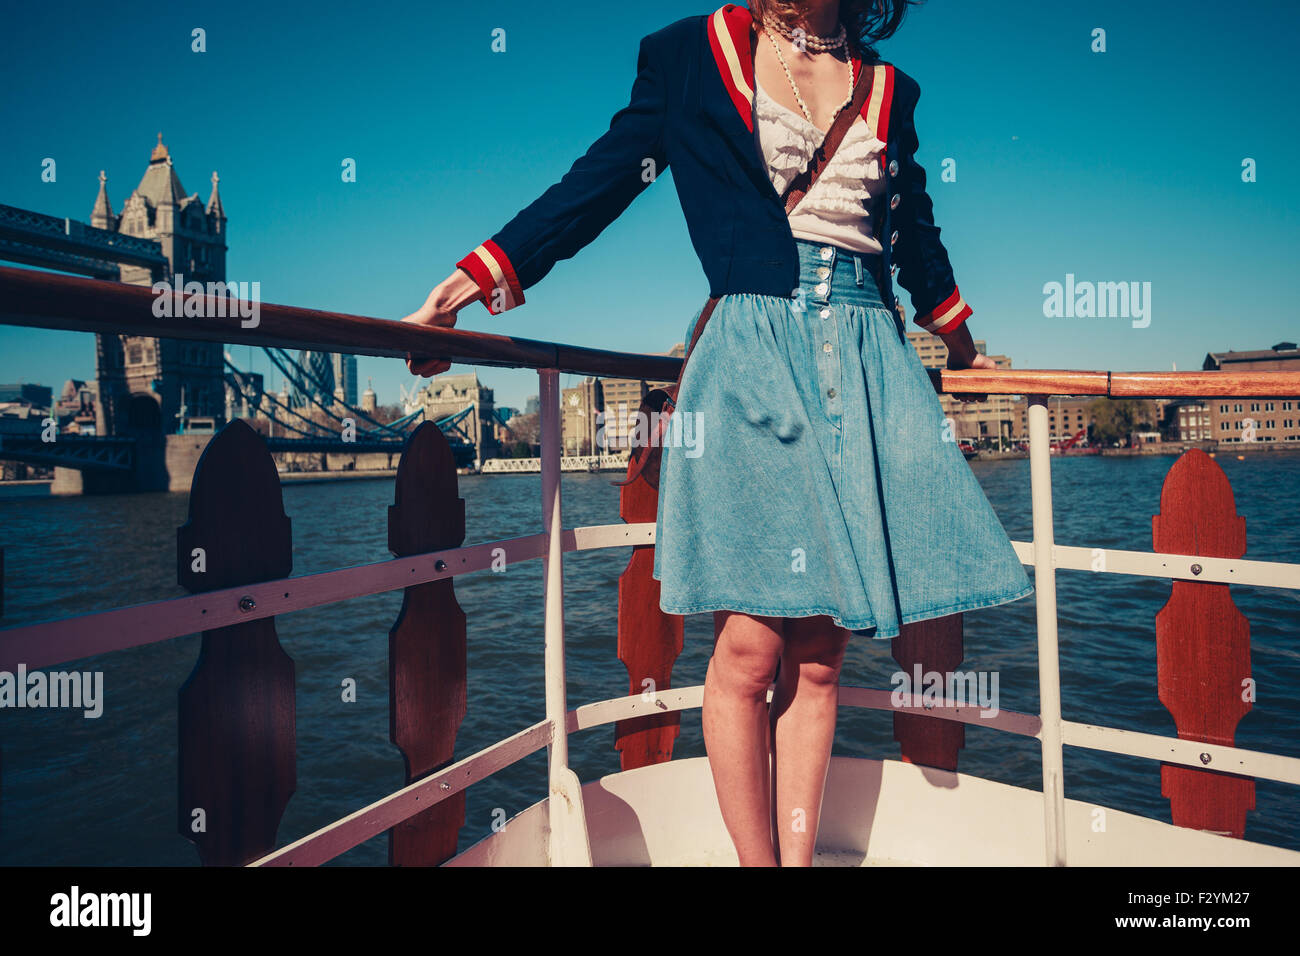 A young woman's skirt is blowing in the wind as she is standing on the deck of a boat cruising down the river Stock Photo